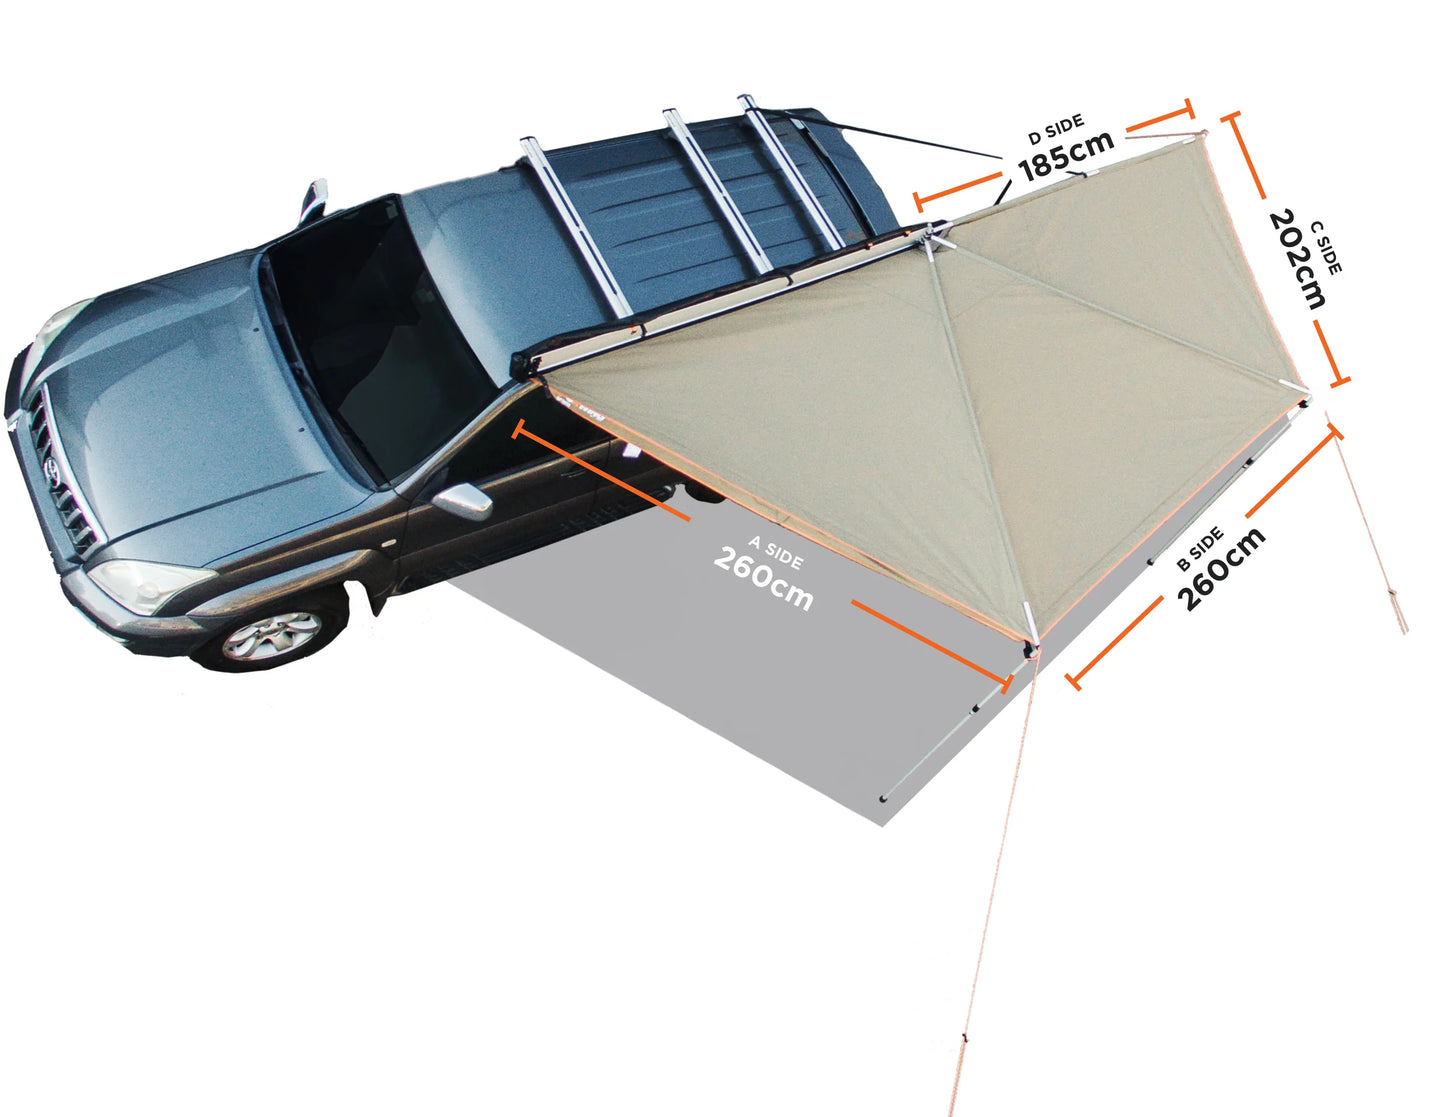 FOXWING Awning 180°